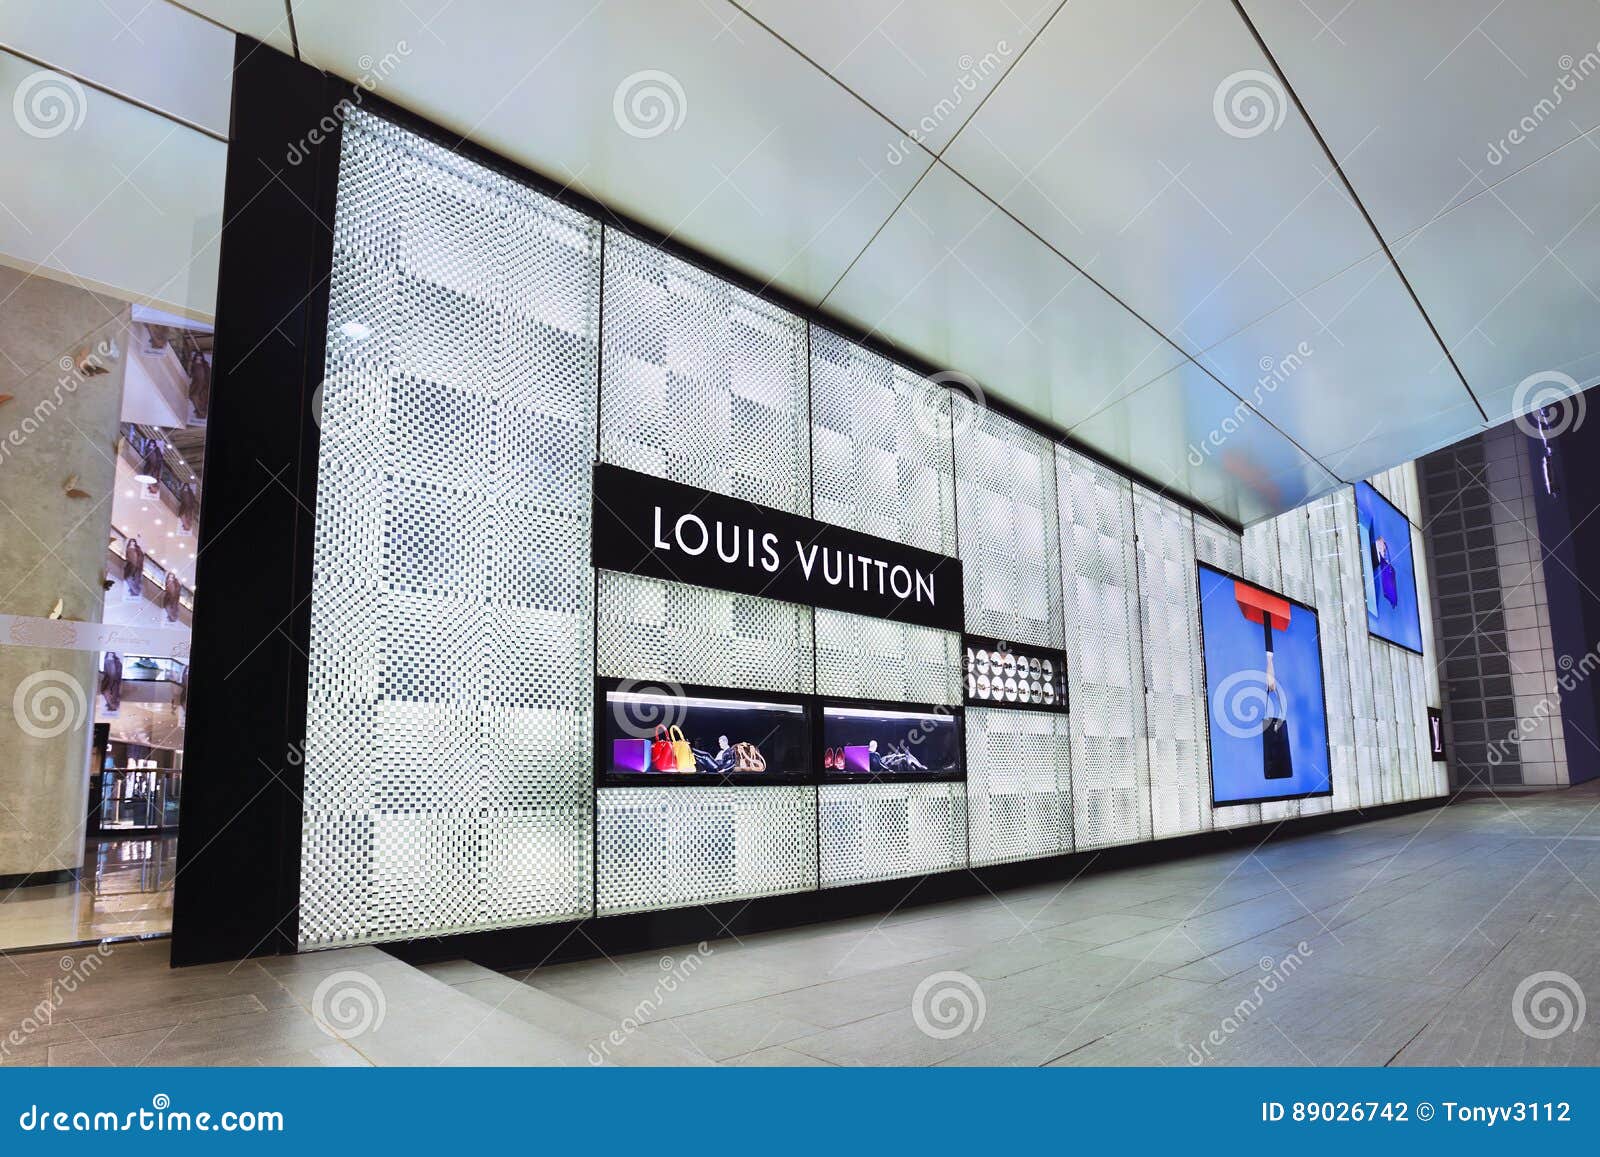 Louis Vuitton Outlet At Night, Beijing, China Editorial Photography - Image of brand ...